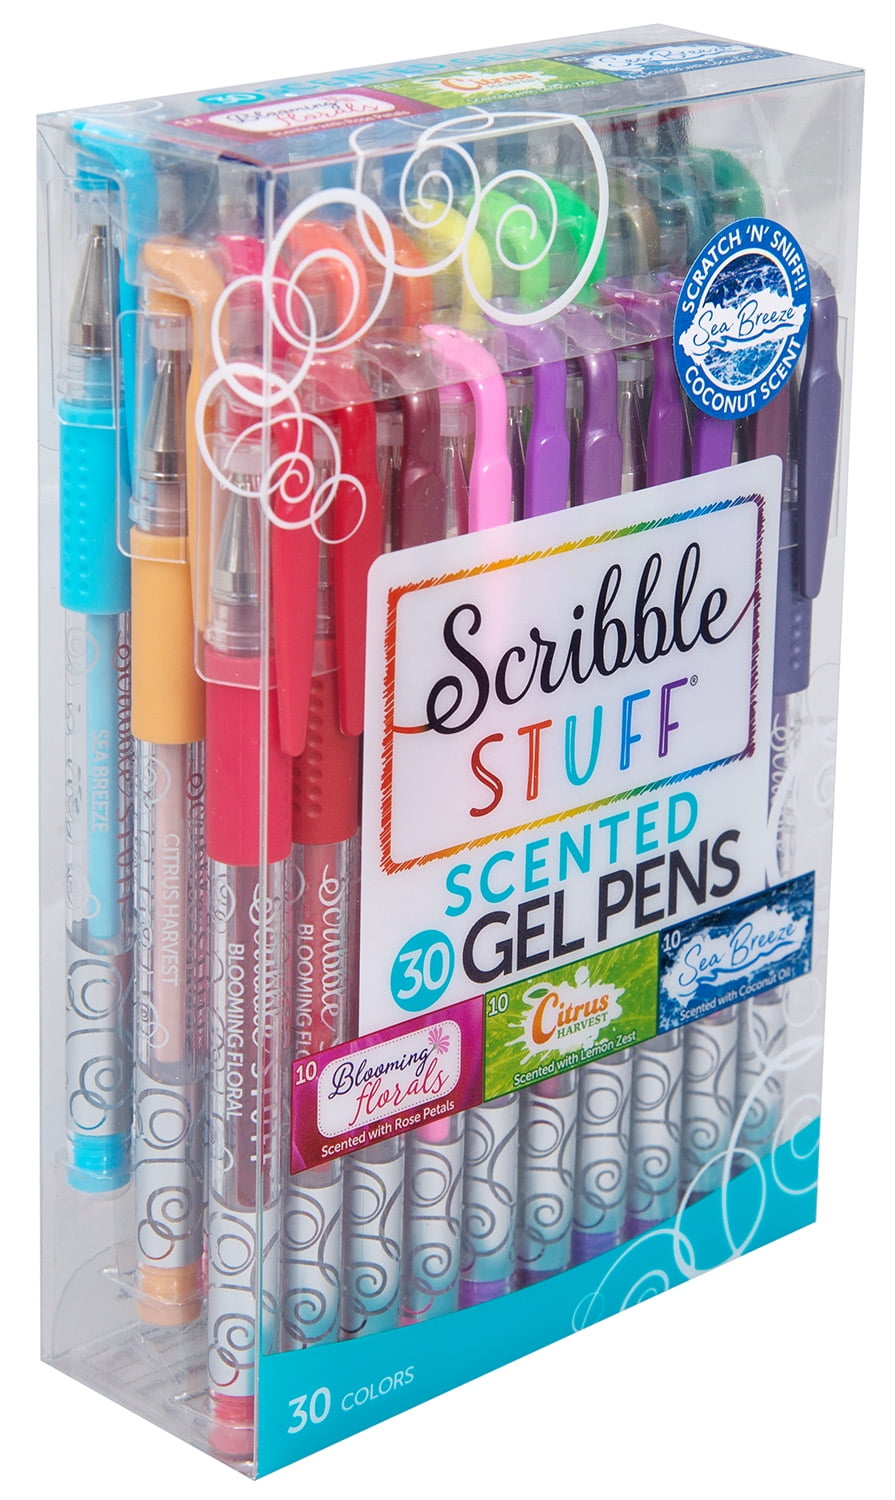 Scribble Stuff Scented Gel Pens - 30 Count - Includes Storage Box